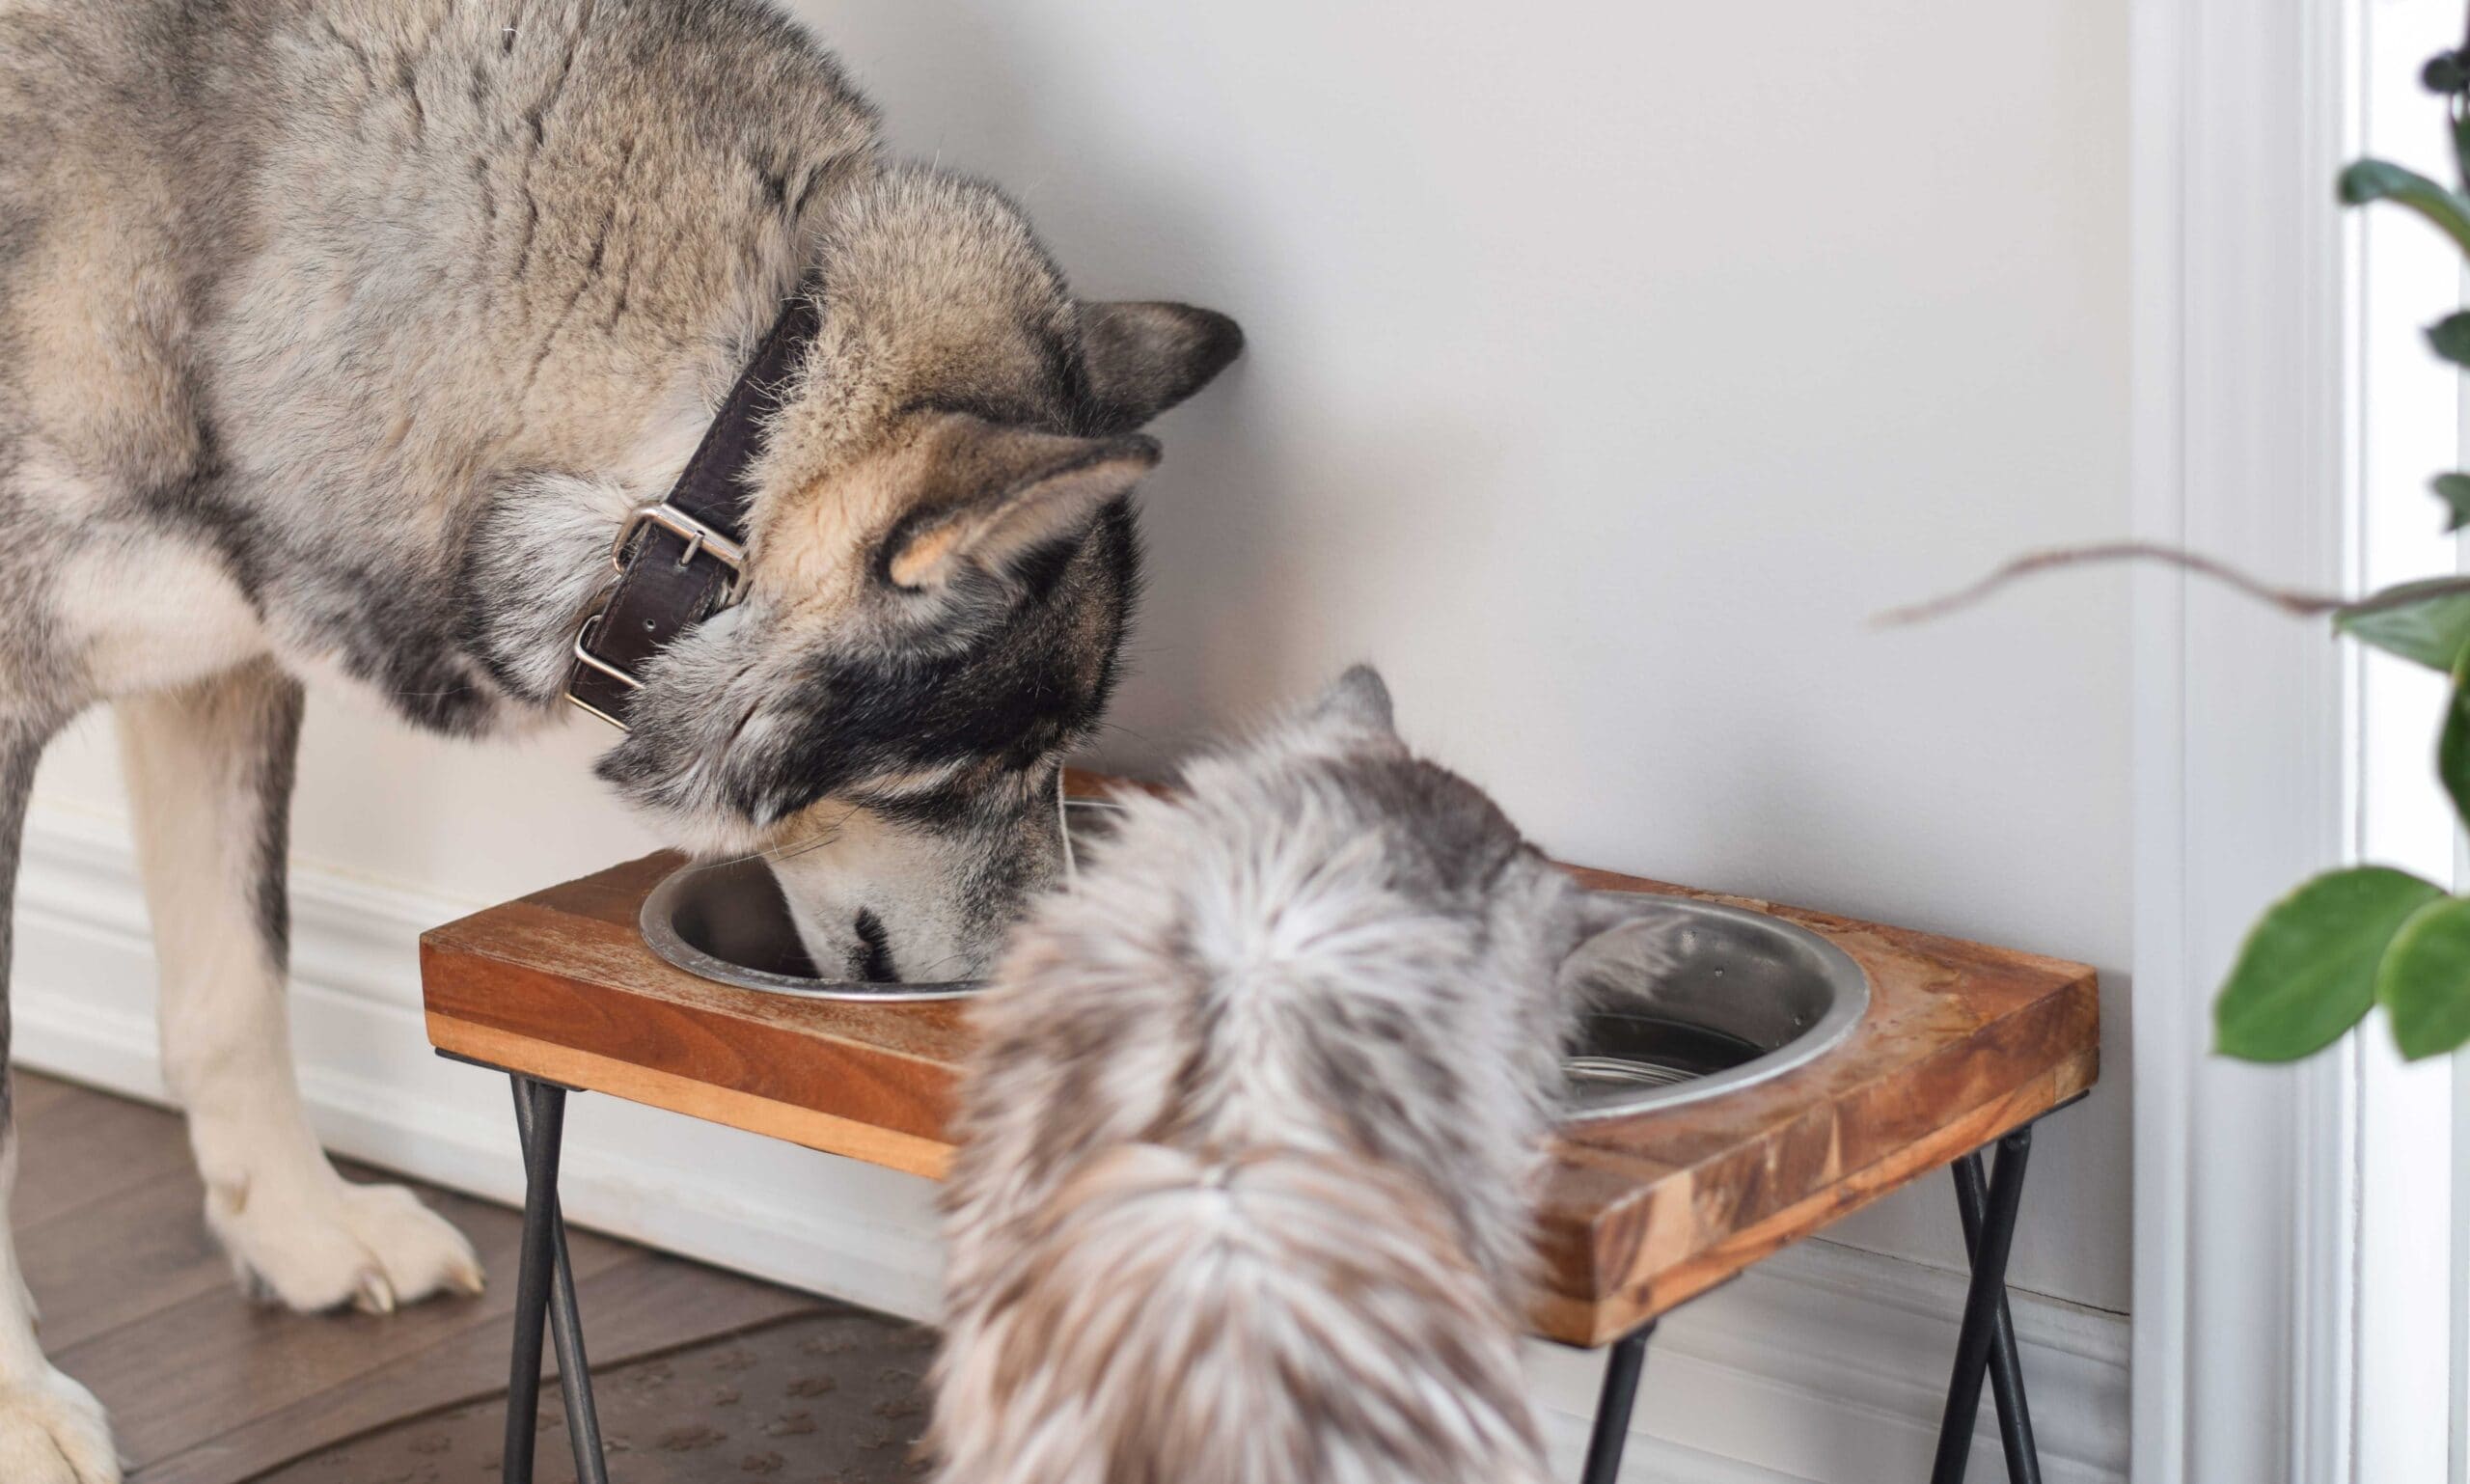 can cats eat dog food: dog and cat eating in home